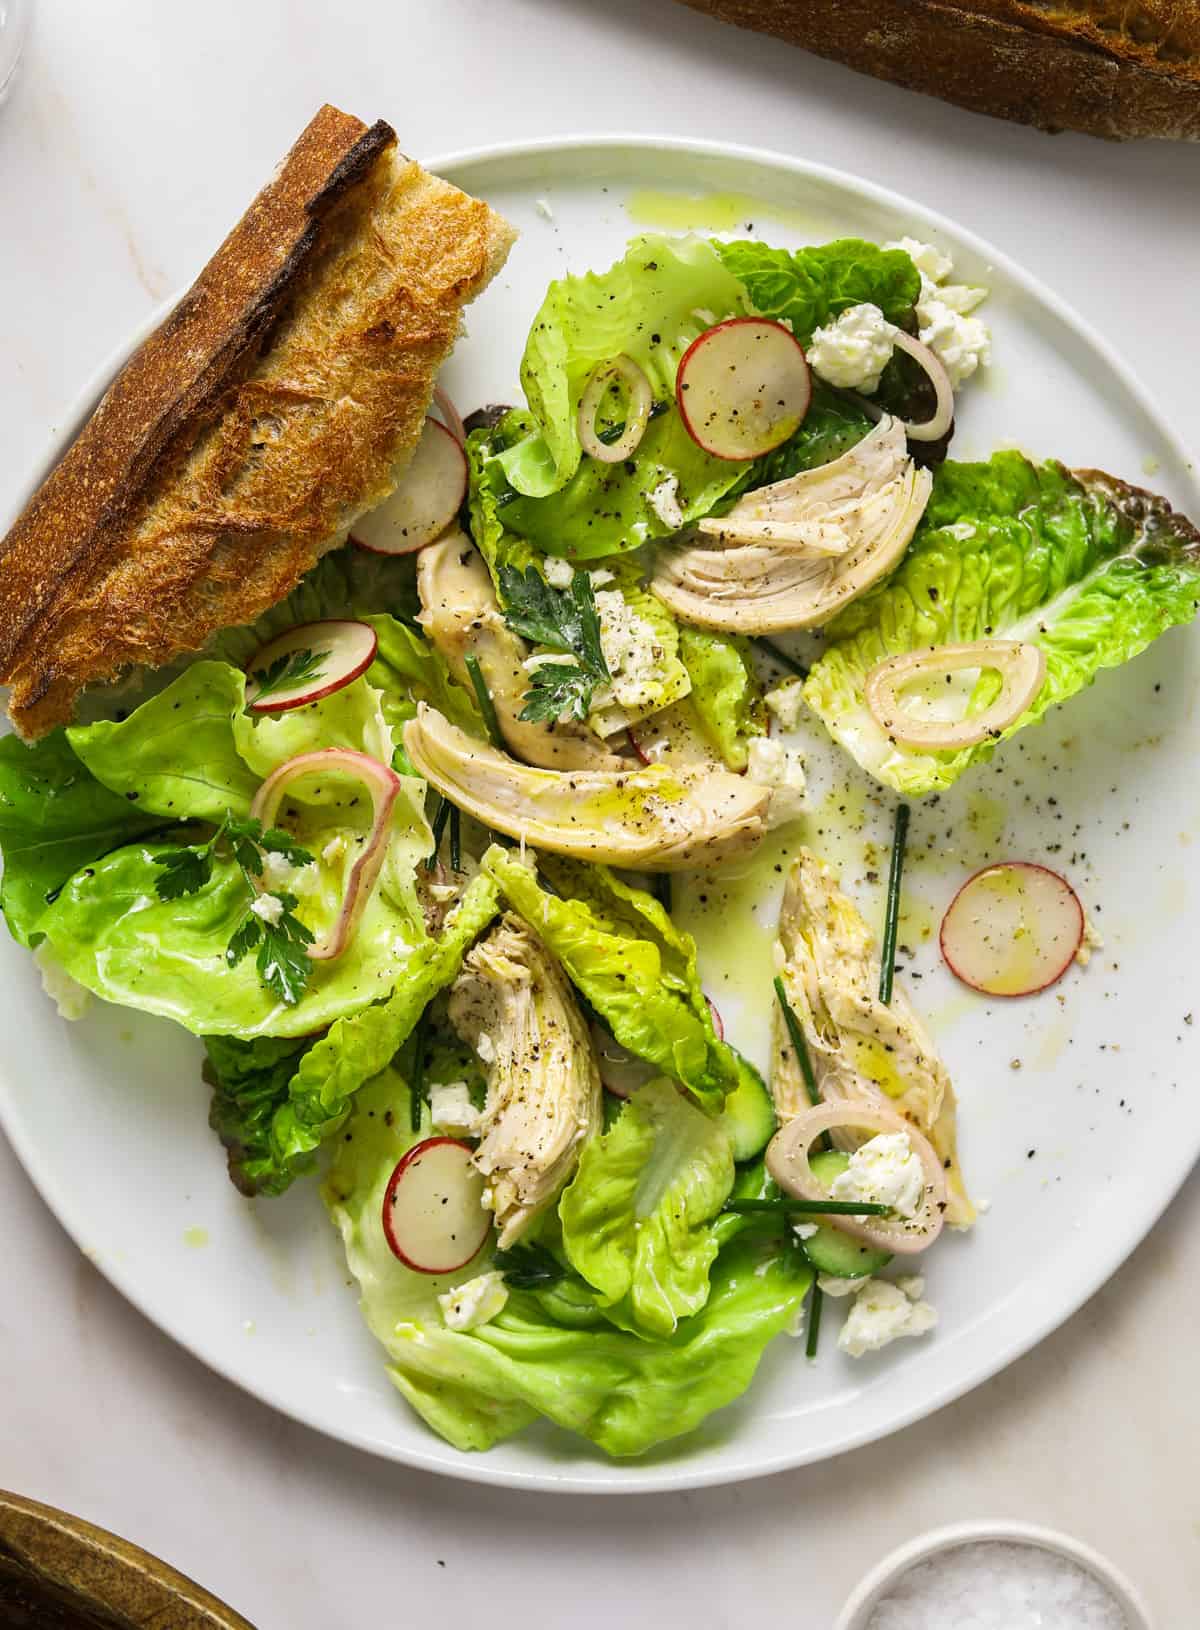 a close up image of a salad on a white plate with torn baguette